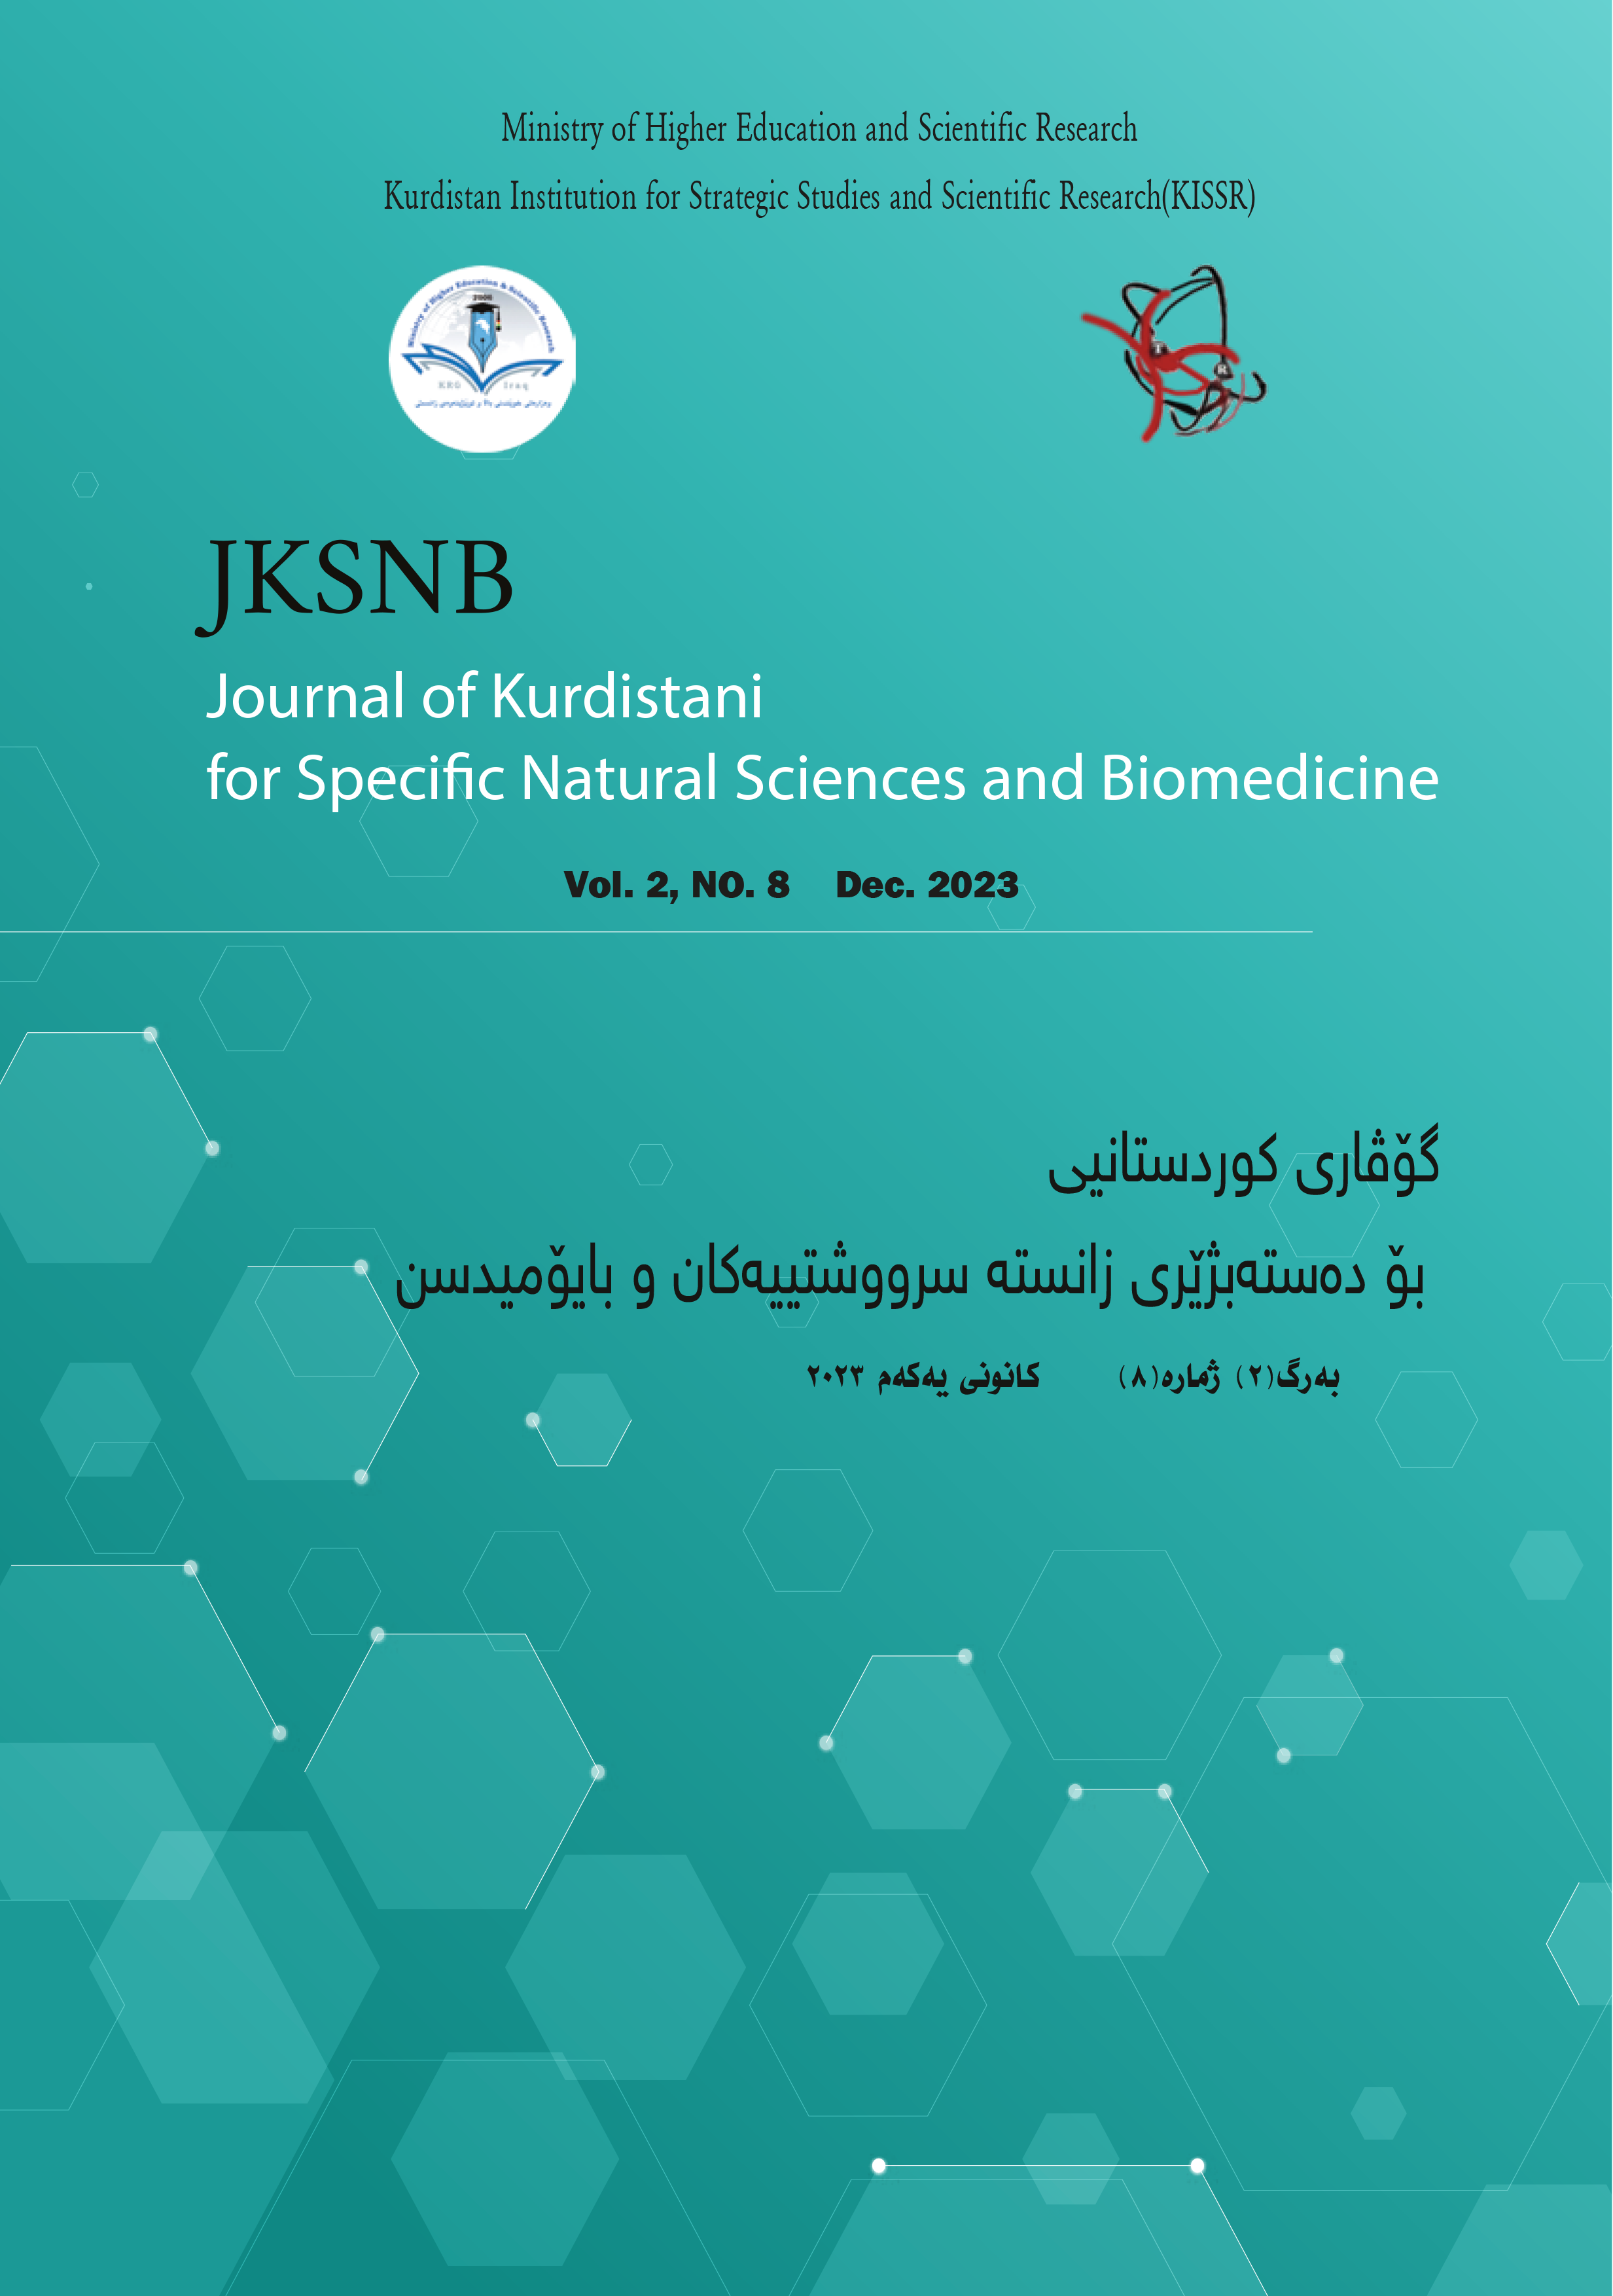 					View Vol. 2 No. 2 (2023): Journal of Kurdistani for Specific Natural Sciences and Biomedicine
				